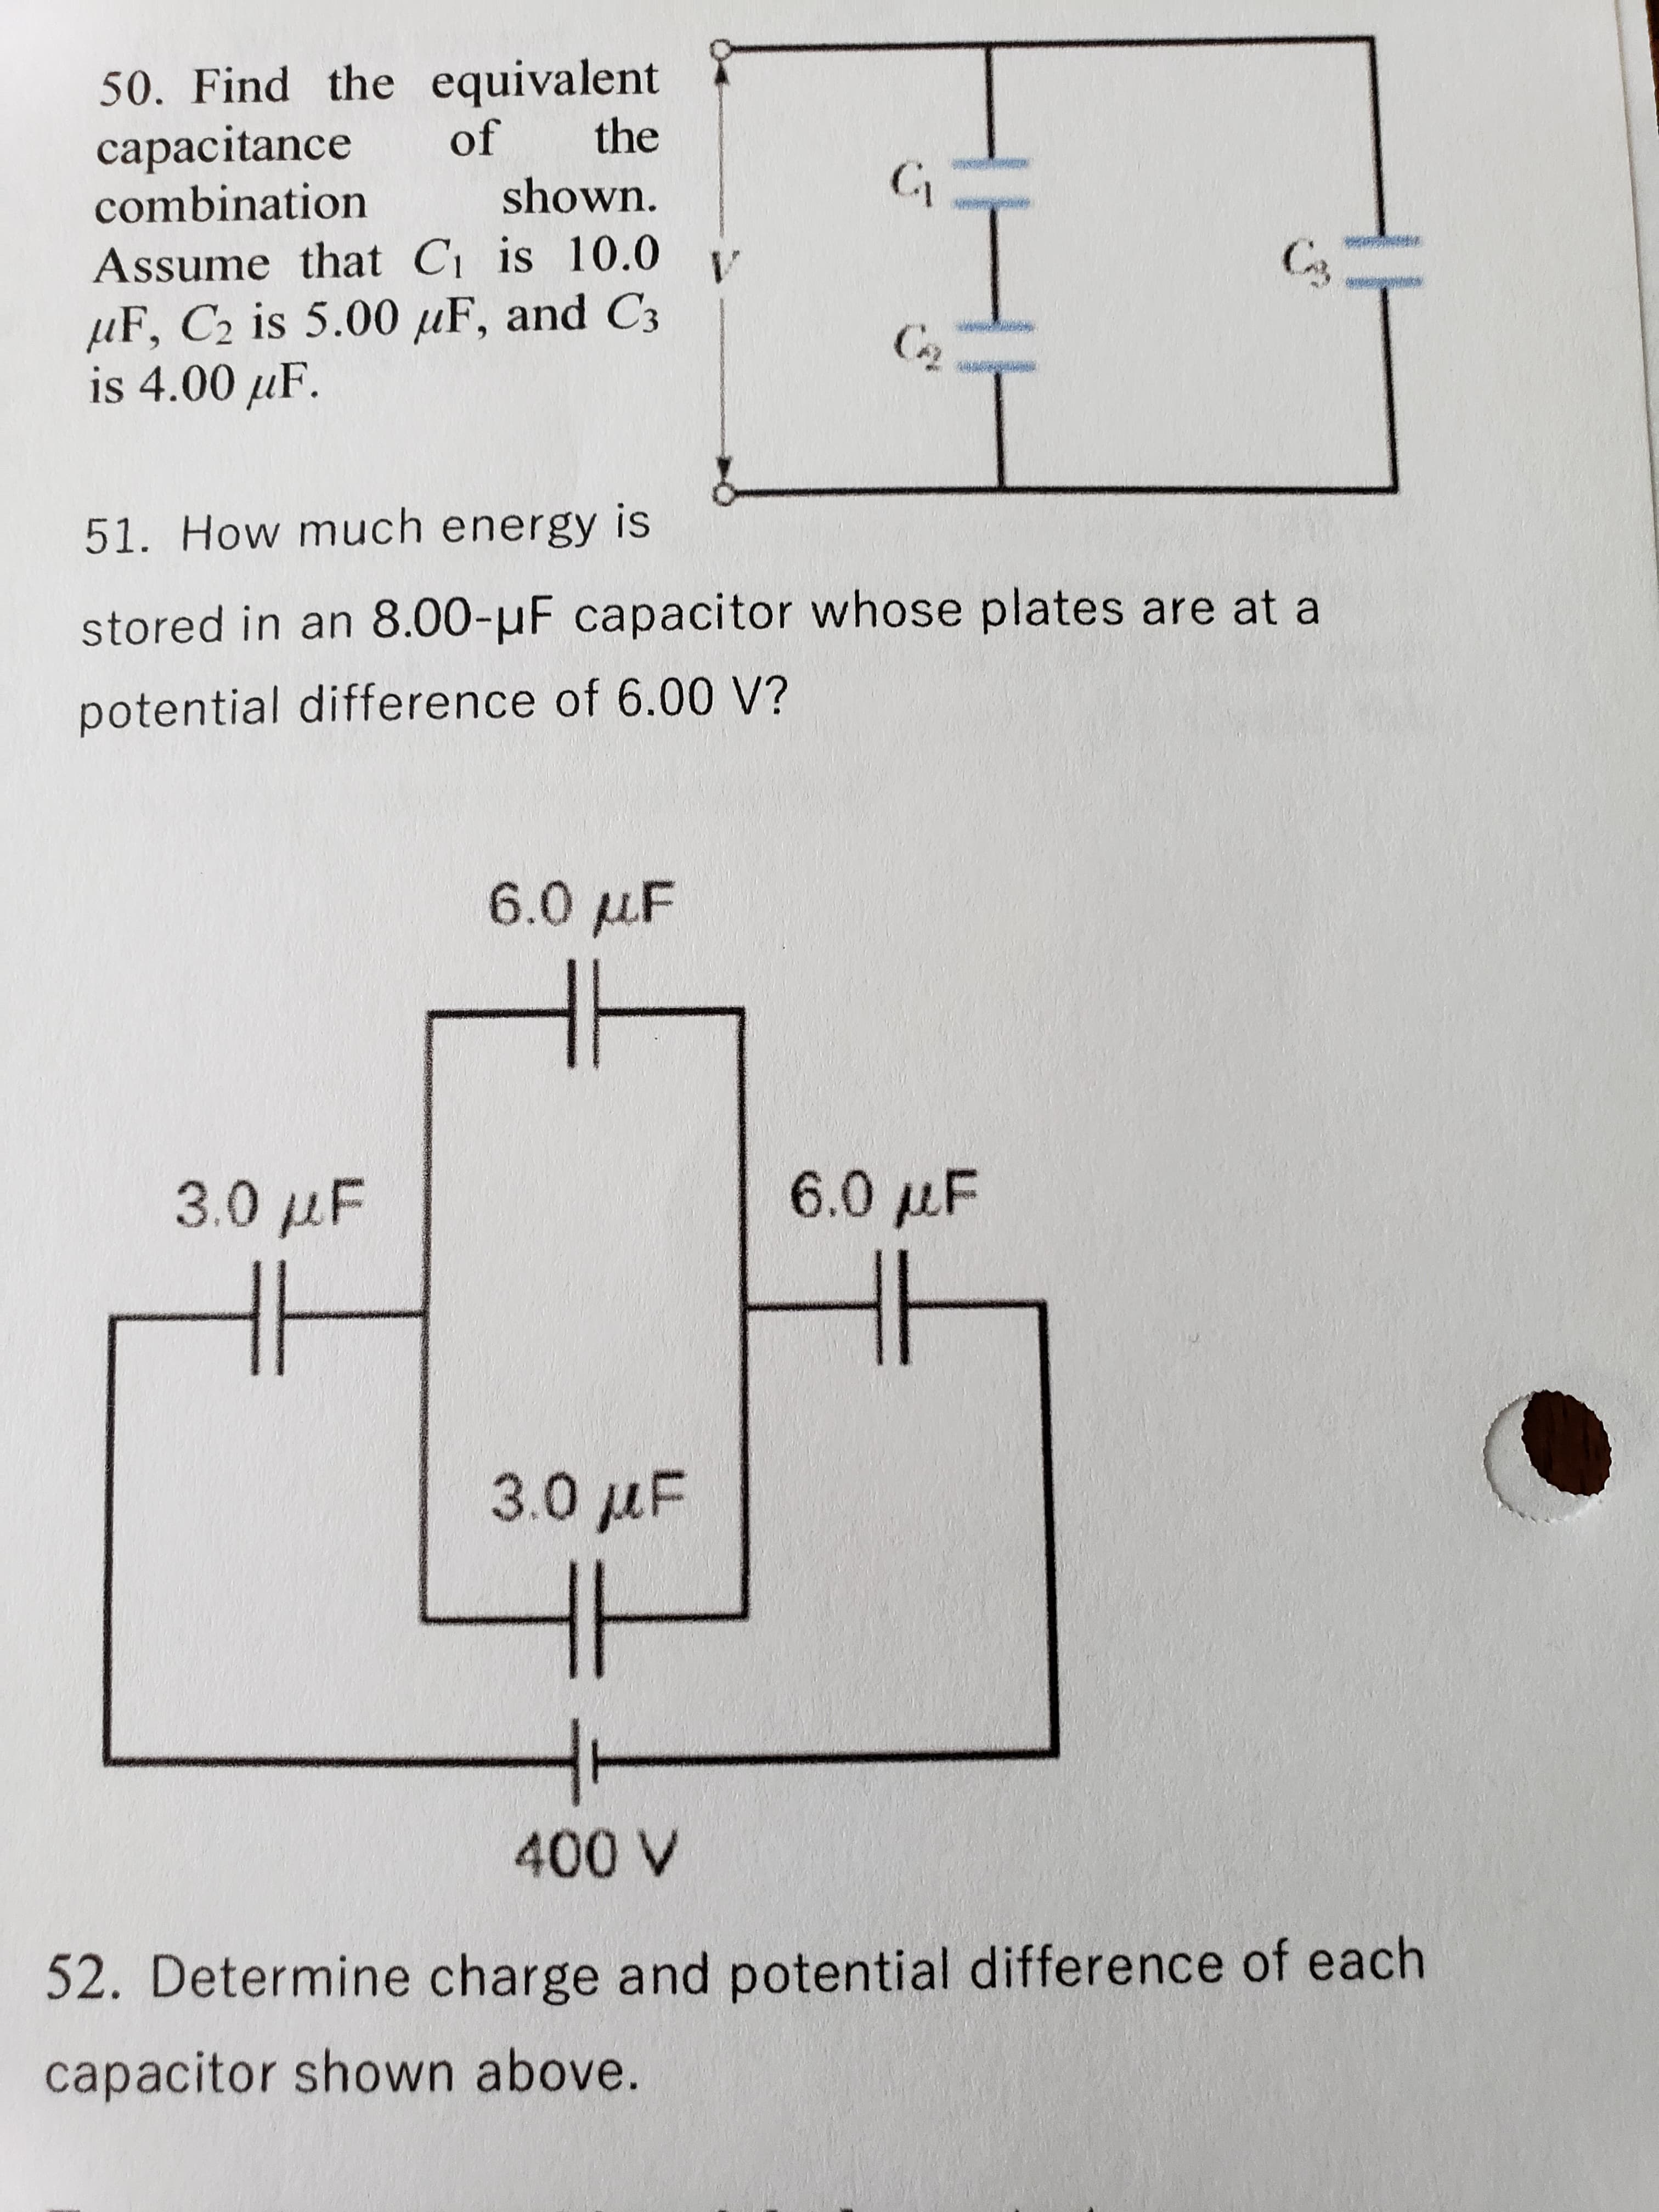 50. Find the equivalent
capacitance
combination
of
the
shown.
Assume that C is 10.0
µF, C2 is 5.00 µF, and C3
is 4.00 µF.
